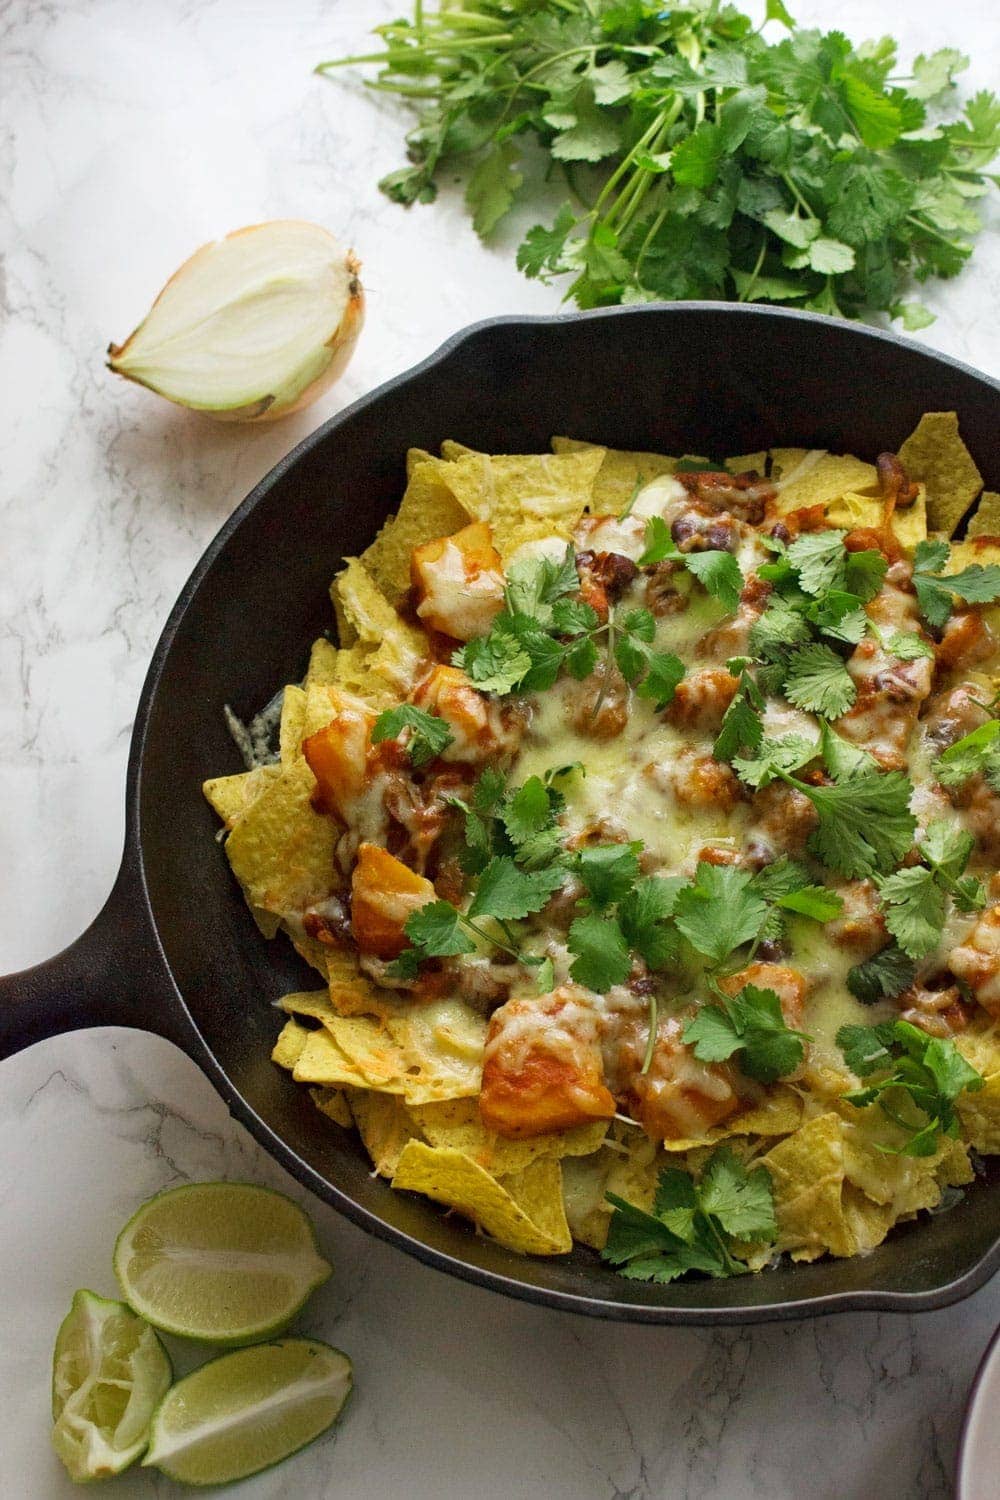 This healthy butternut squash chilli makes the perfect topping for these vegetarian nachos. Add all your favourite toppings for a delicious twist on a classic!